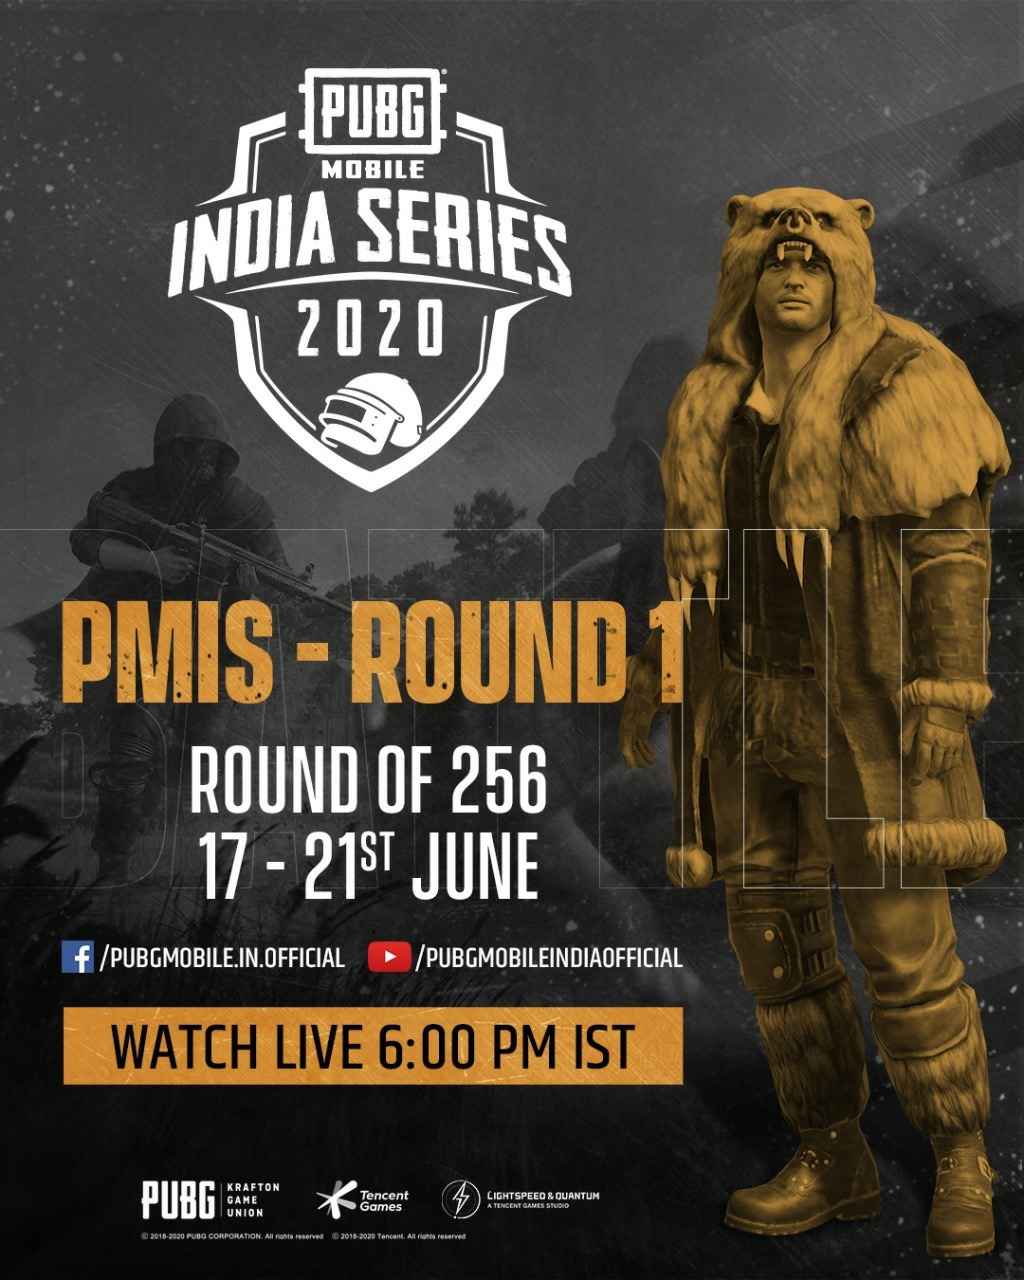 PUBG Mobile India Series 2020 (PMIS) - Round 1, Day 1 Results & Standings in Online Qualifiers